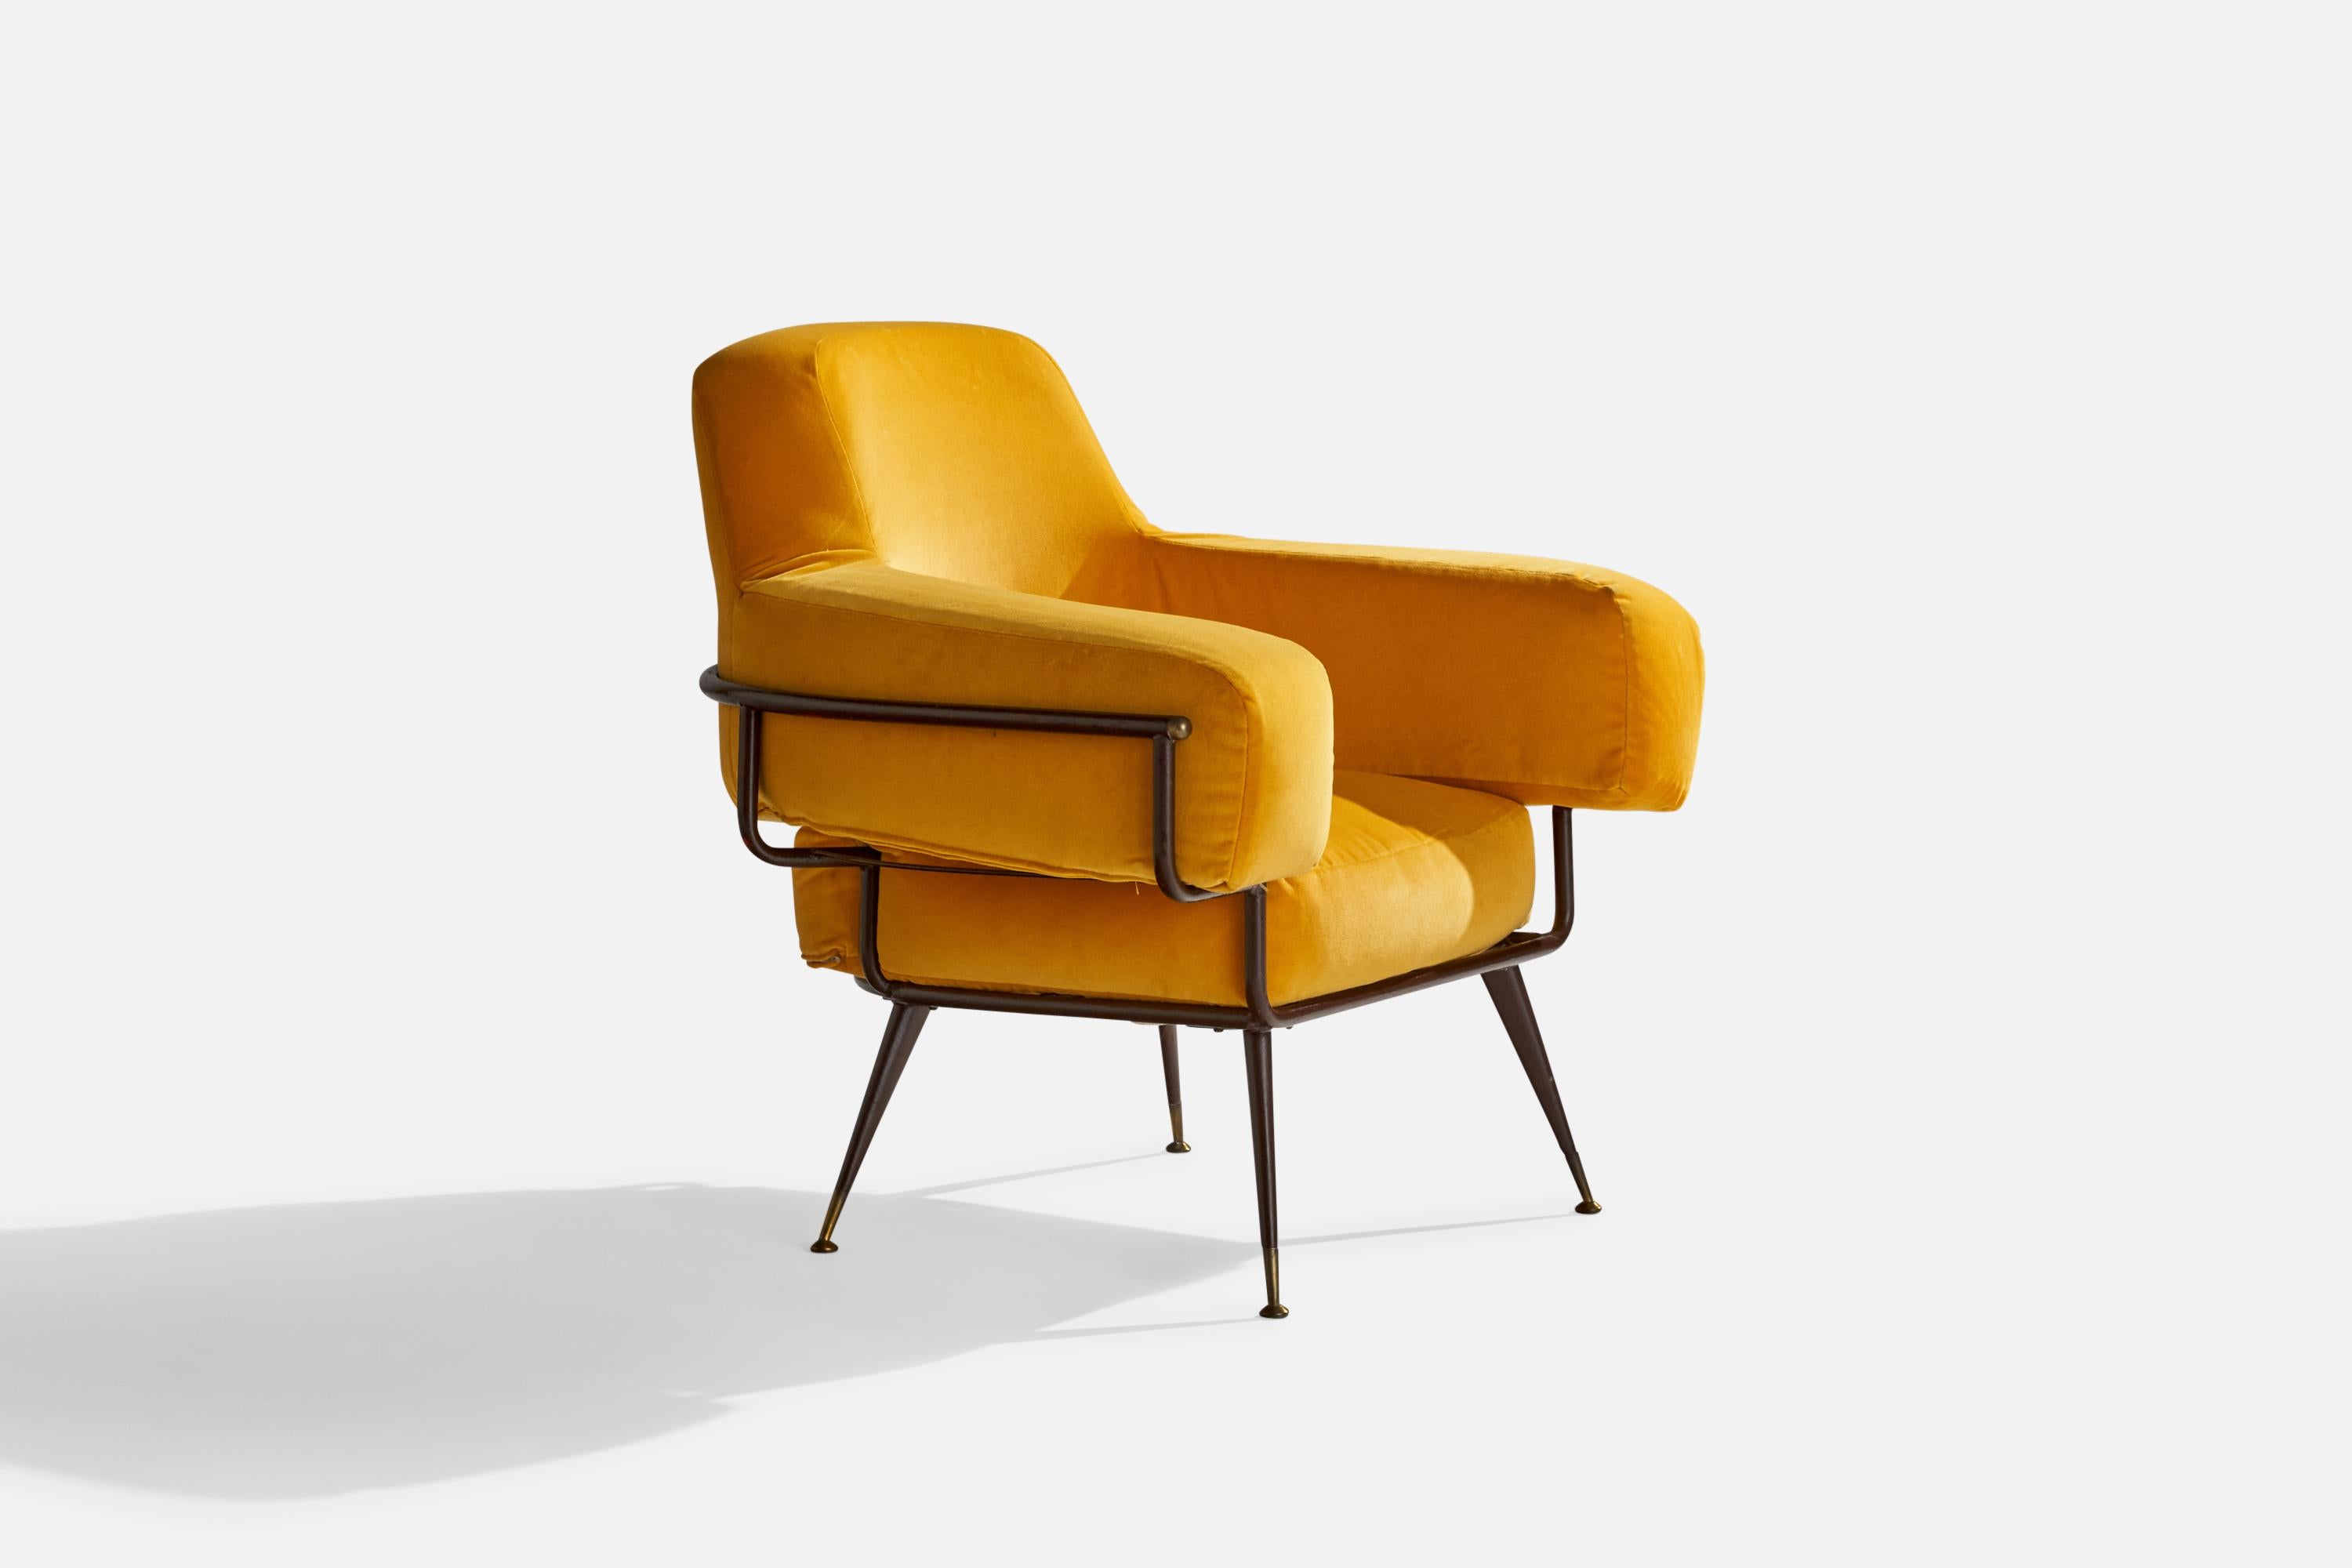 A brass, metal and yellow velvet lounge chair designed by Rito Valla and produced by I.P.E Bologna, Italy 1950s.

seat height 15.5”.